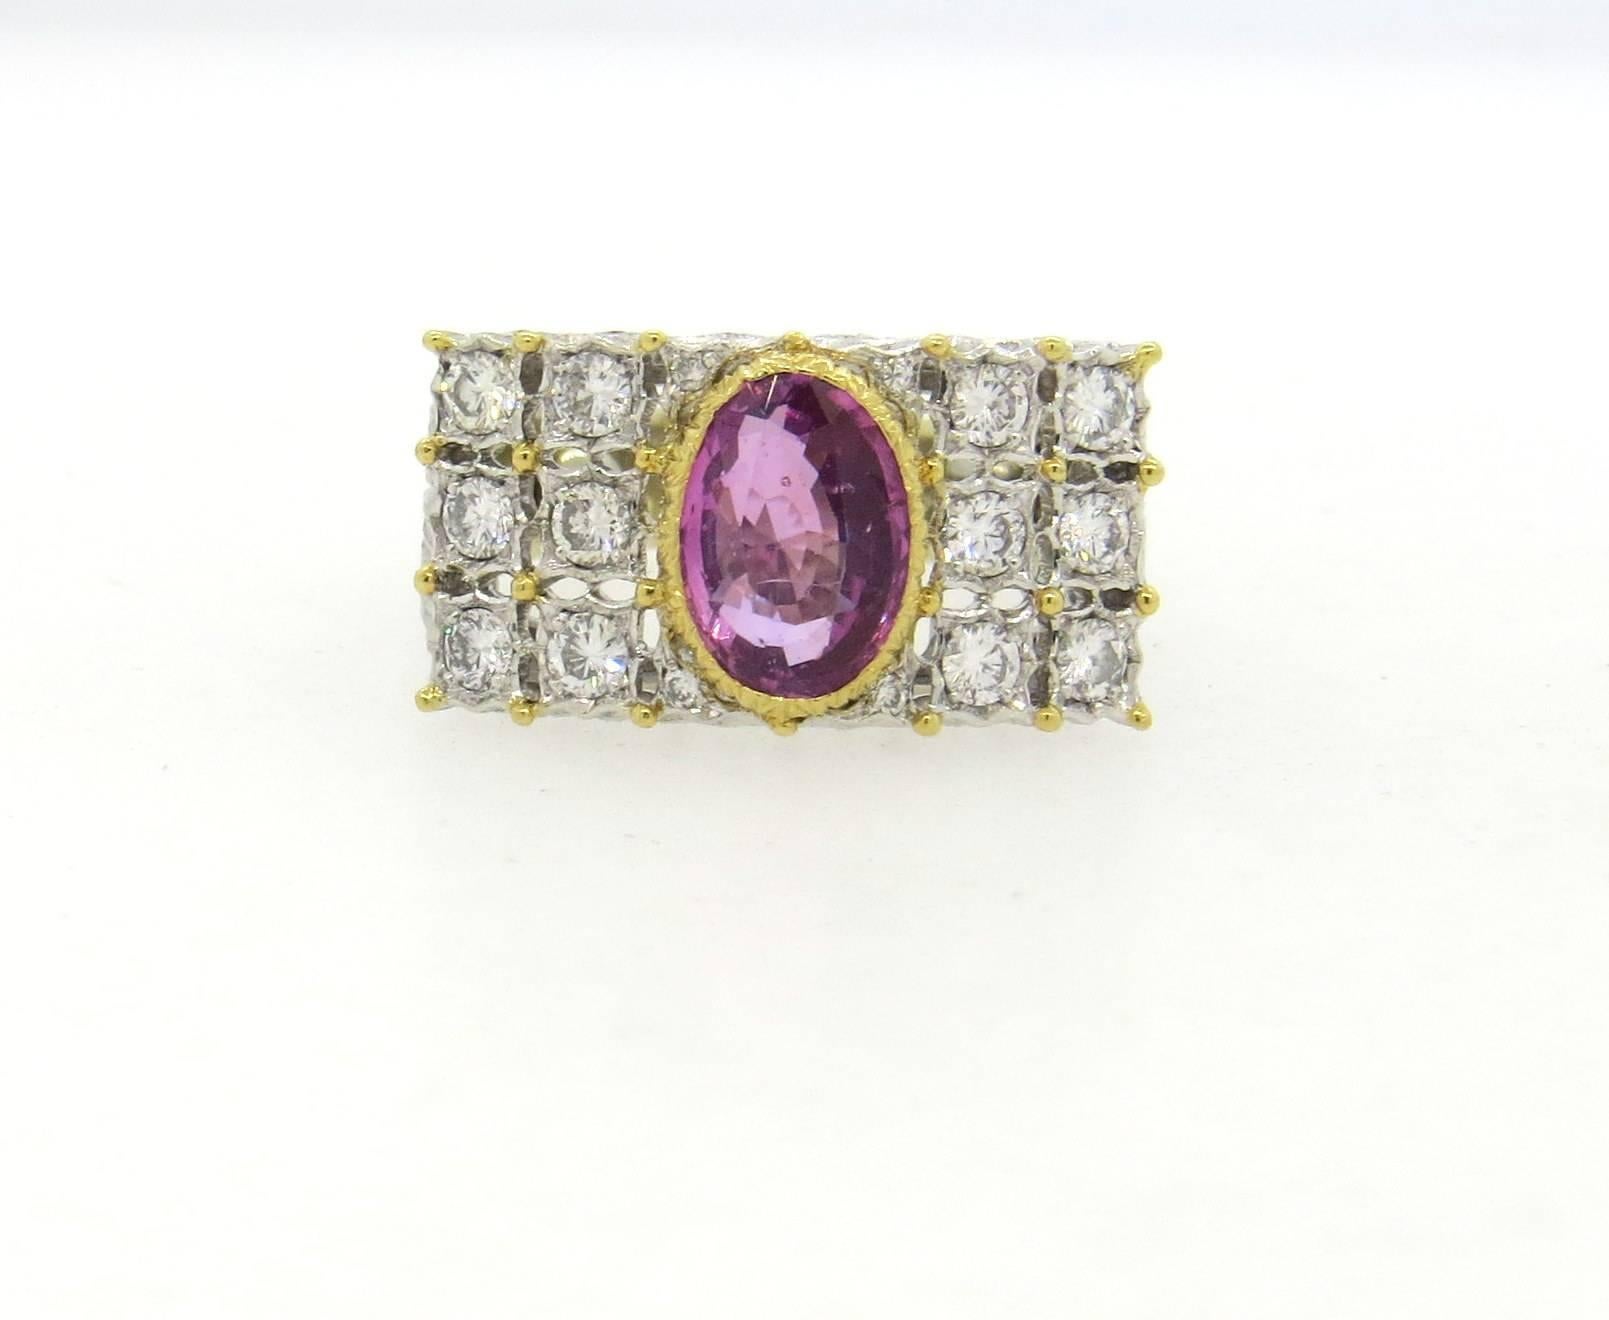 Beautiful 18k white and yellow gold ring, crafted by Buccellati, set with 8.6mm x 6.1mm pink sapphire, surrounded with approx. 0.60ctw in G/VS diamonds. Ring is a size 6 (sizing balls can be removed to increase size)  top of the ring is 11mm x 20mm.